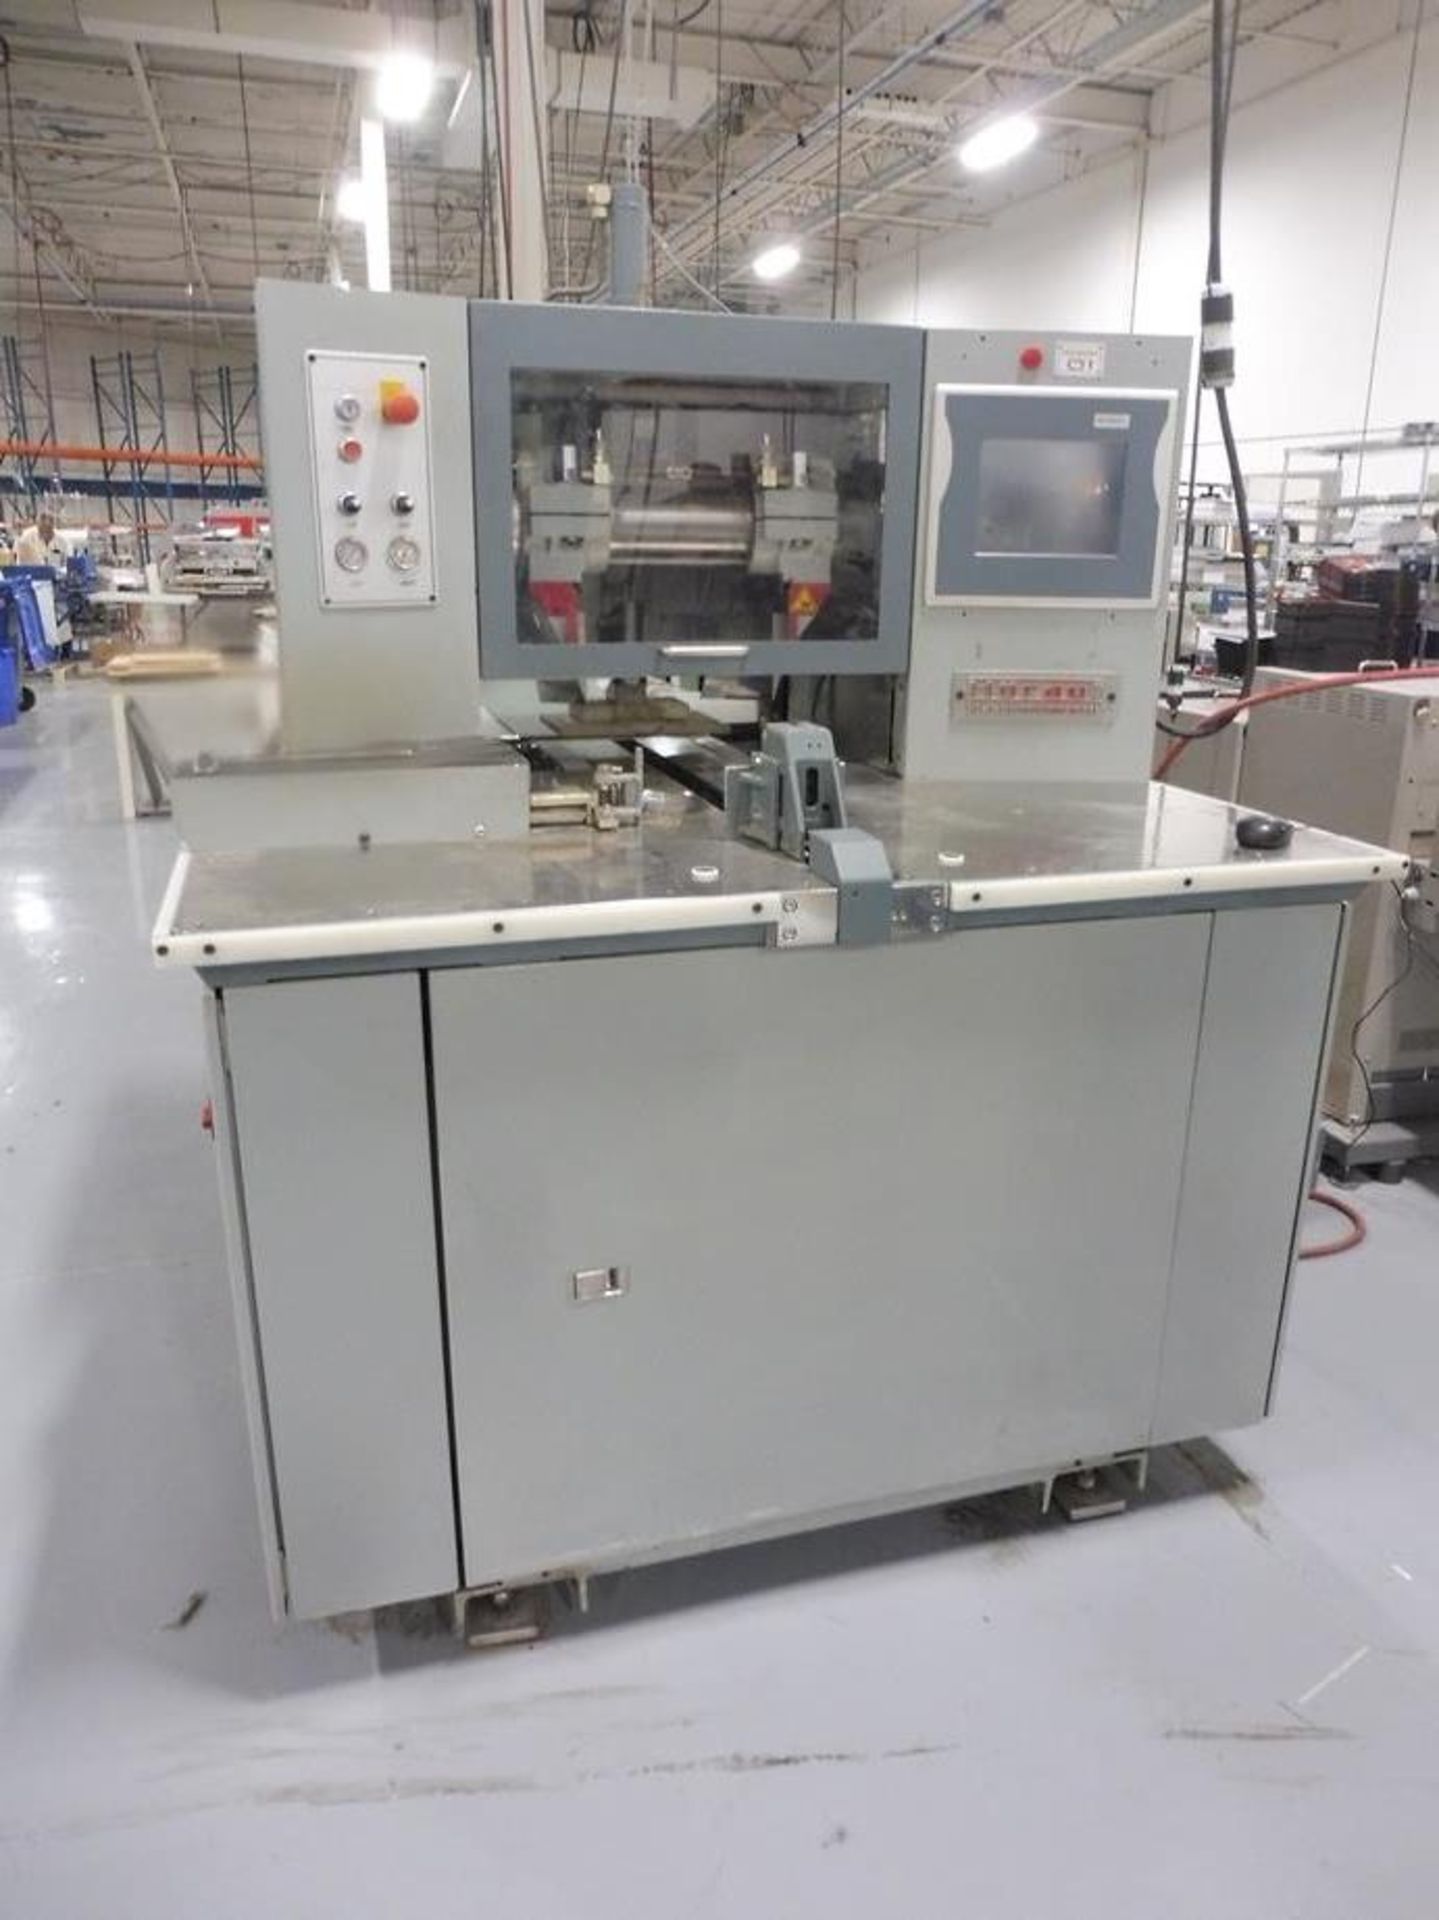 2007 HORAUF "SN-140" 3-Knife ECO-Trimmer, S/N: 047550, Additional Knives, (North York Facility) - Image 2 of 10